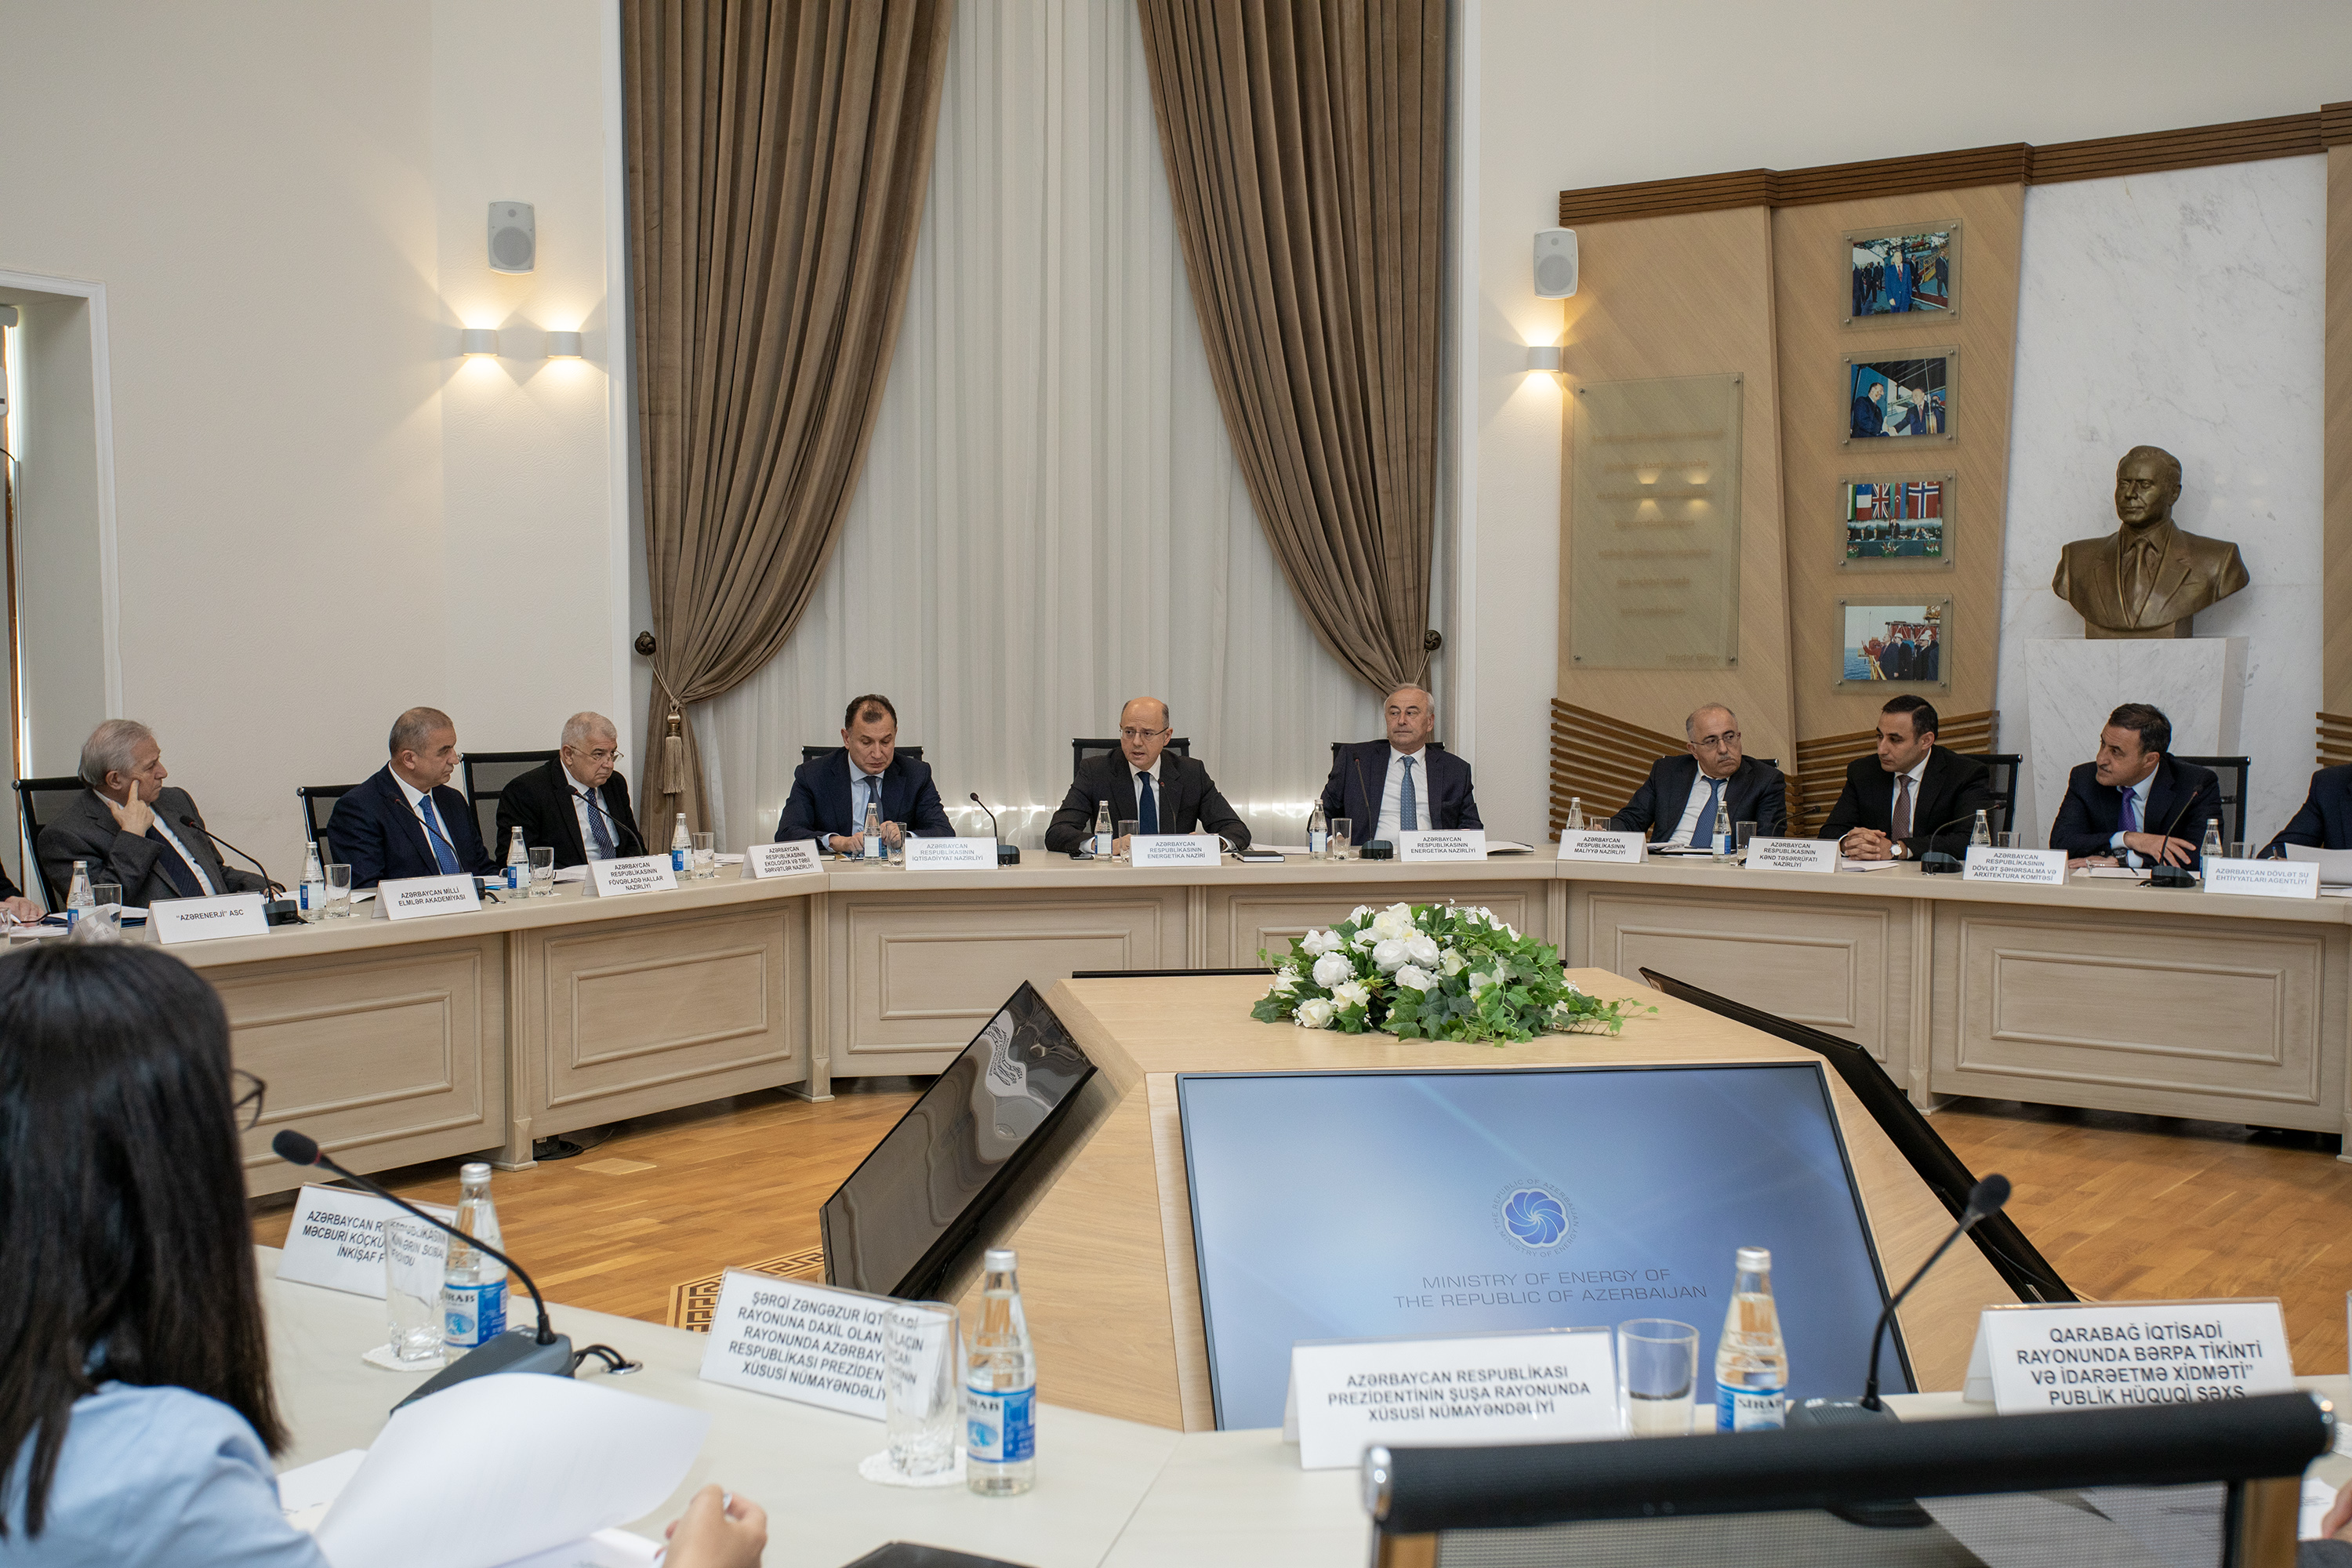 Next meeting of the Working Group on Coordination and Monitoring was held